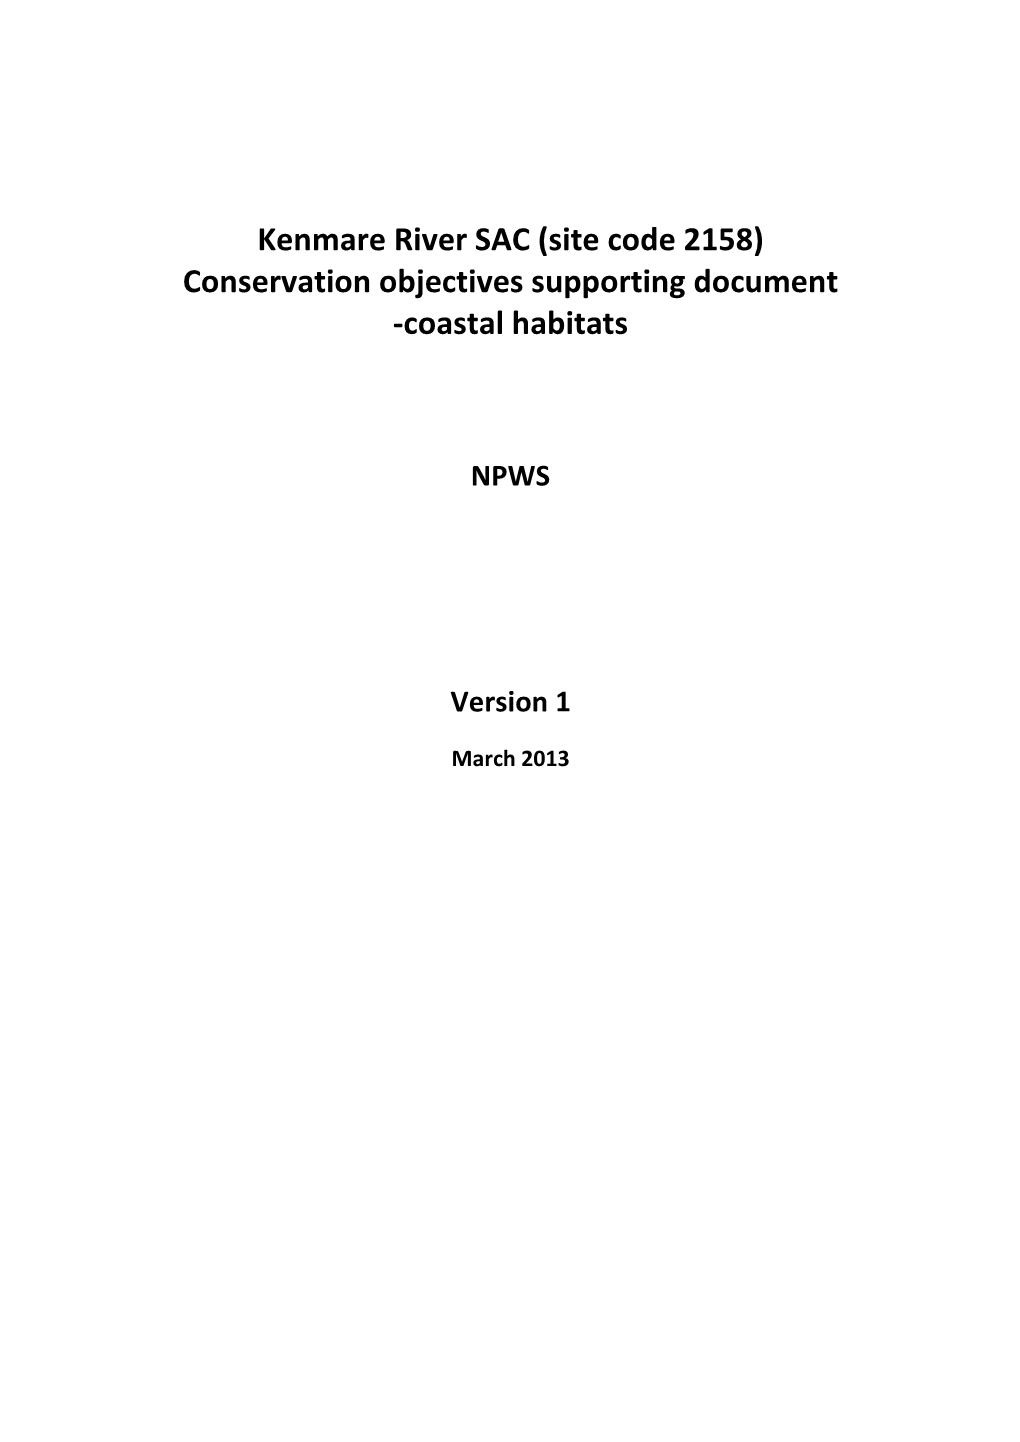 Kenmare River SAC (Site Code 2158) Conservation Objectives Supporting Document -Coastal Habitats